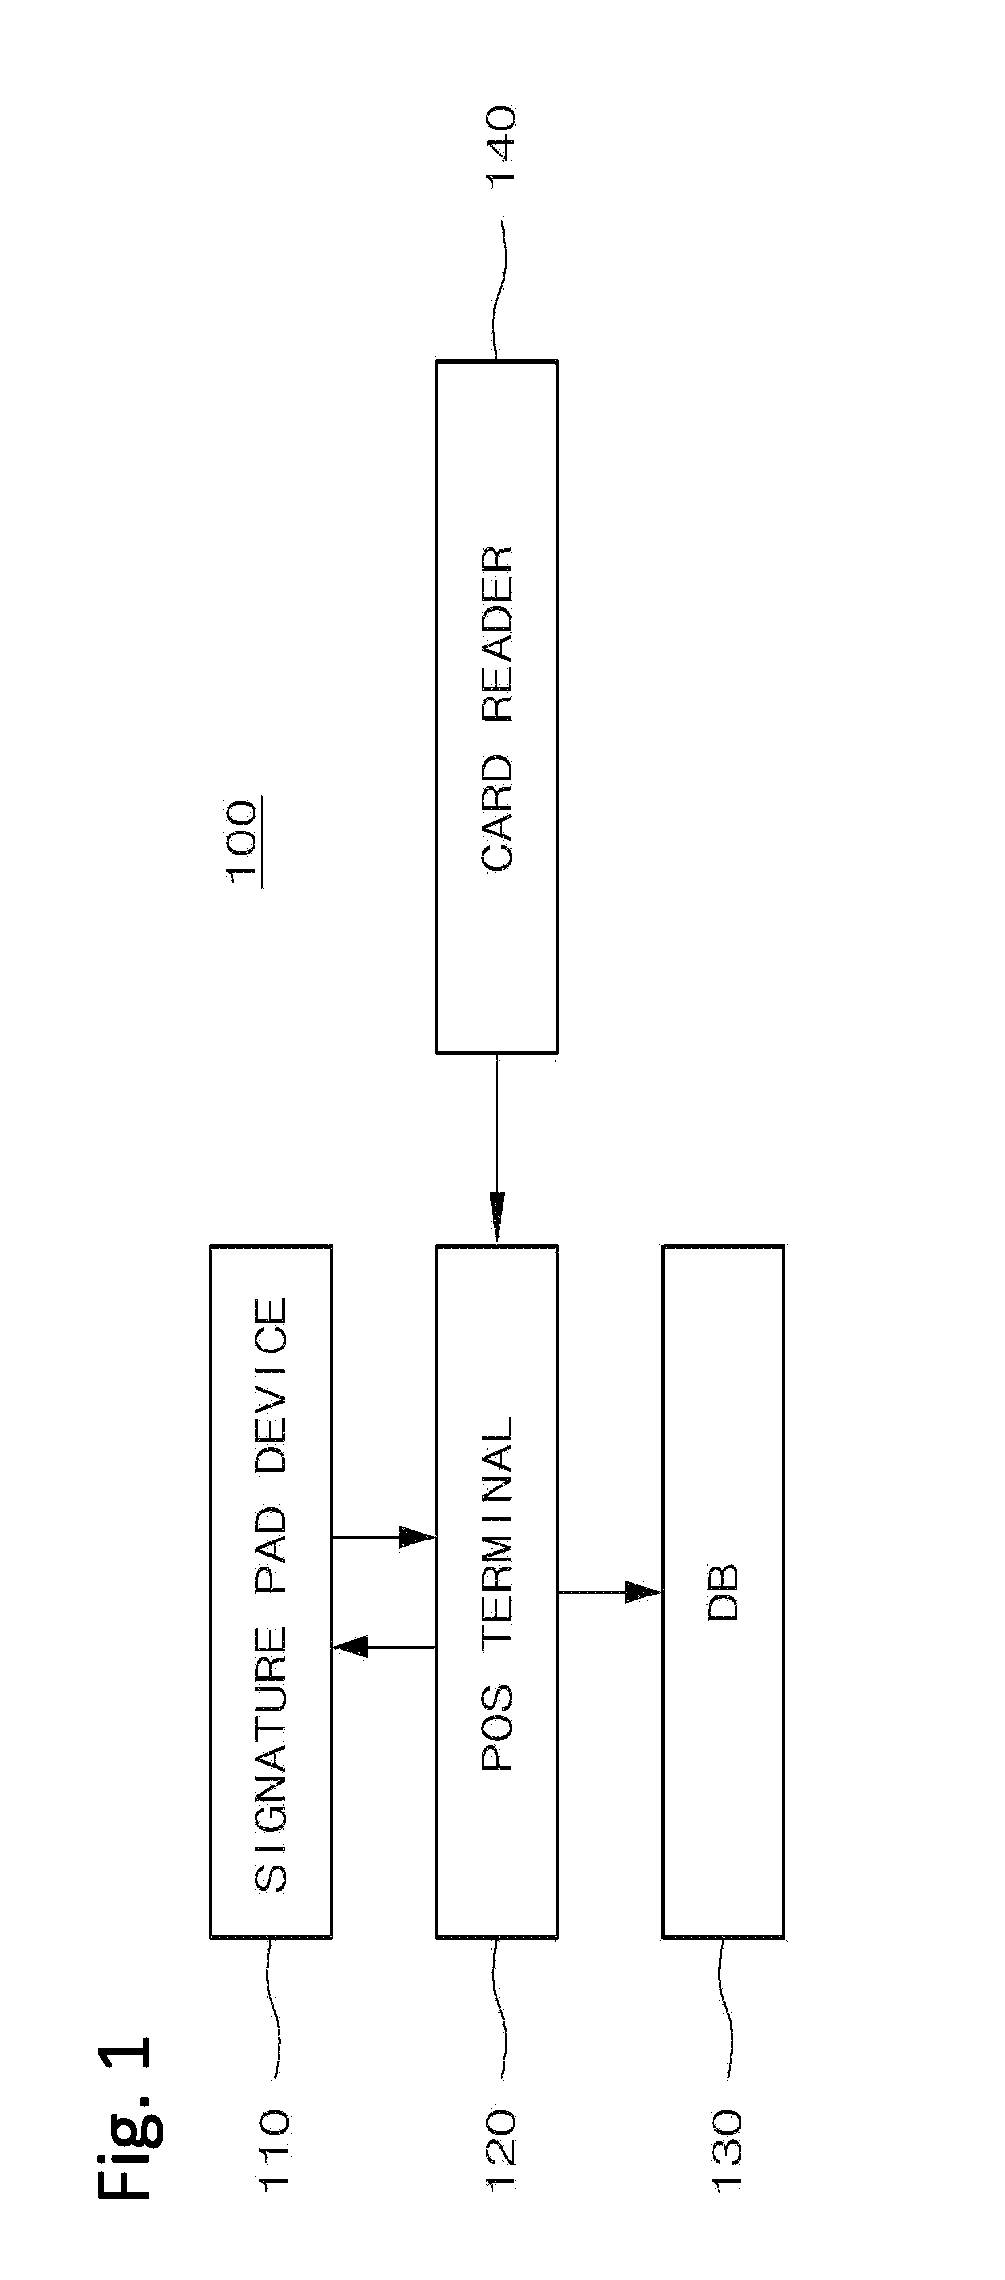 User authentication apparatus and method for POS system